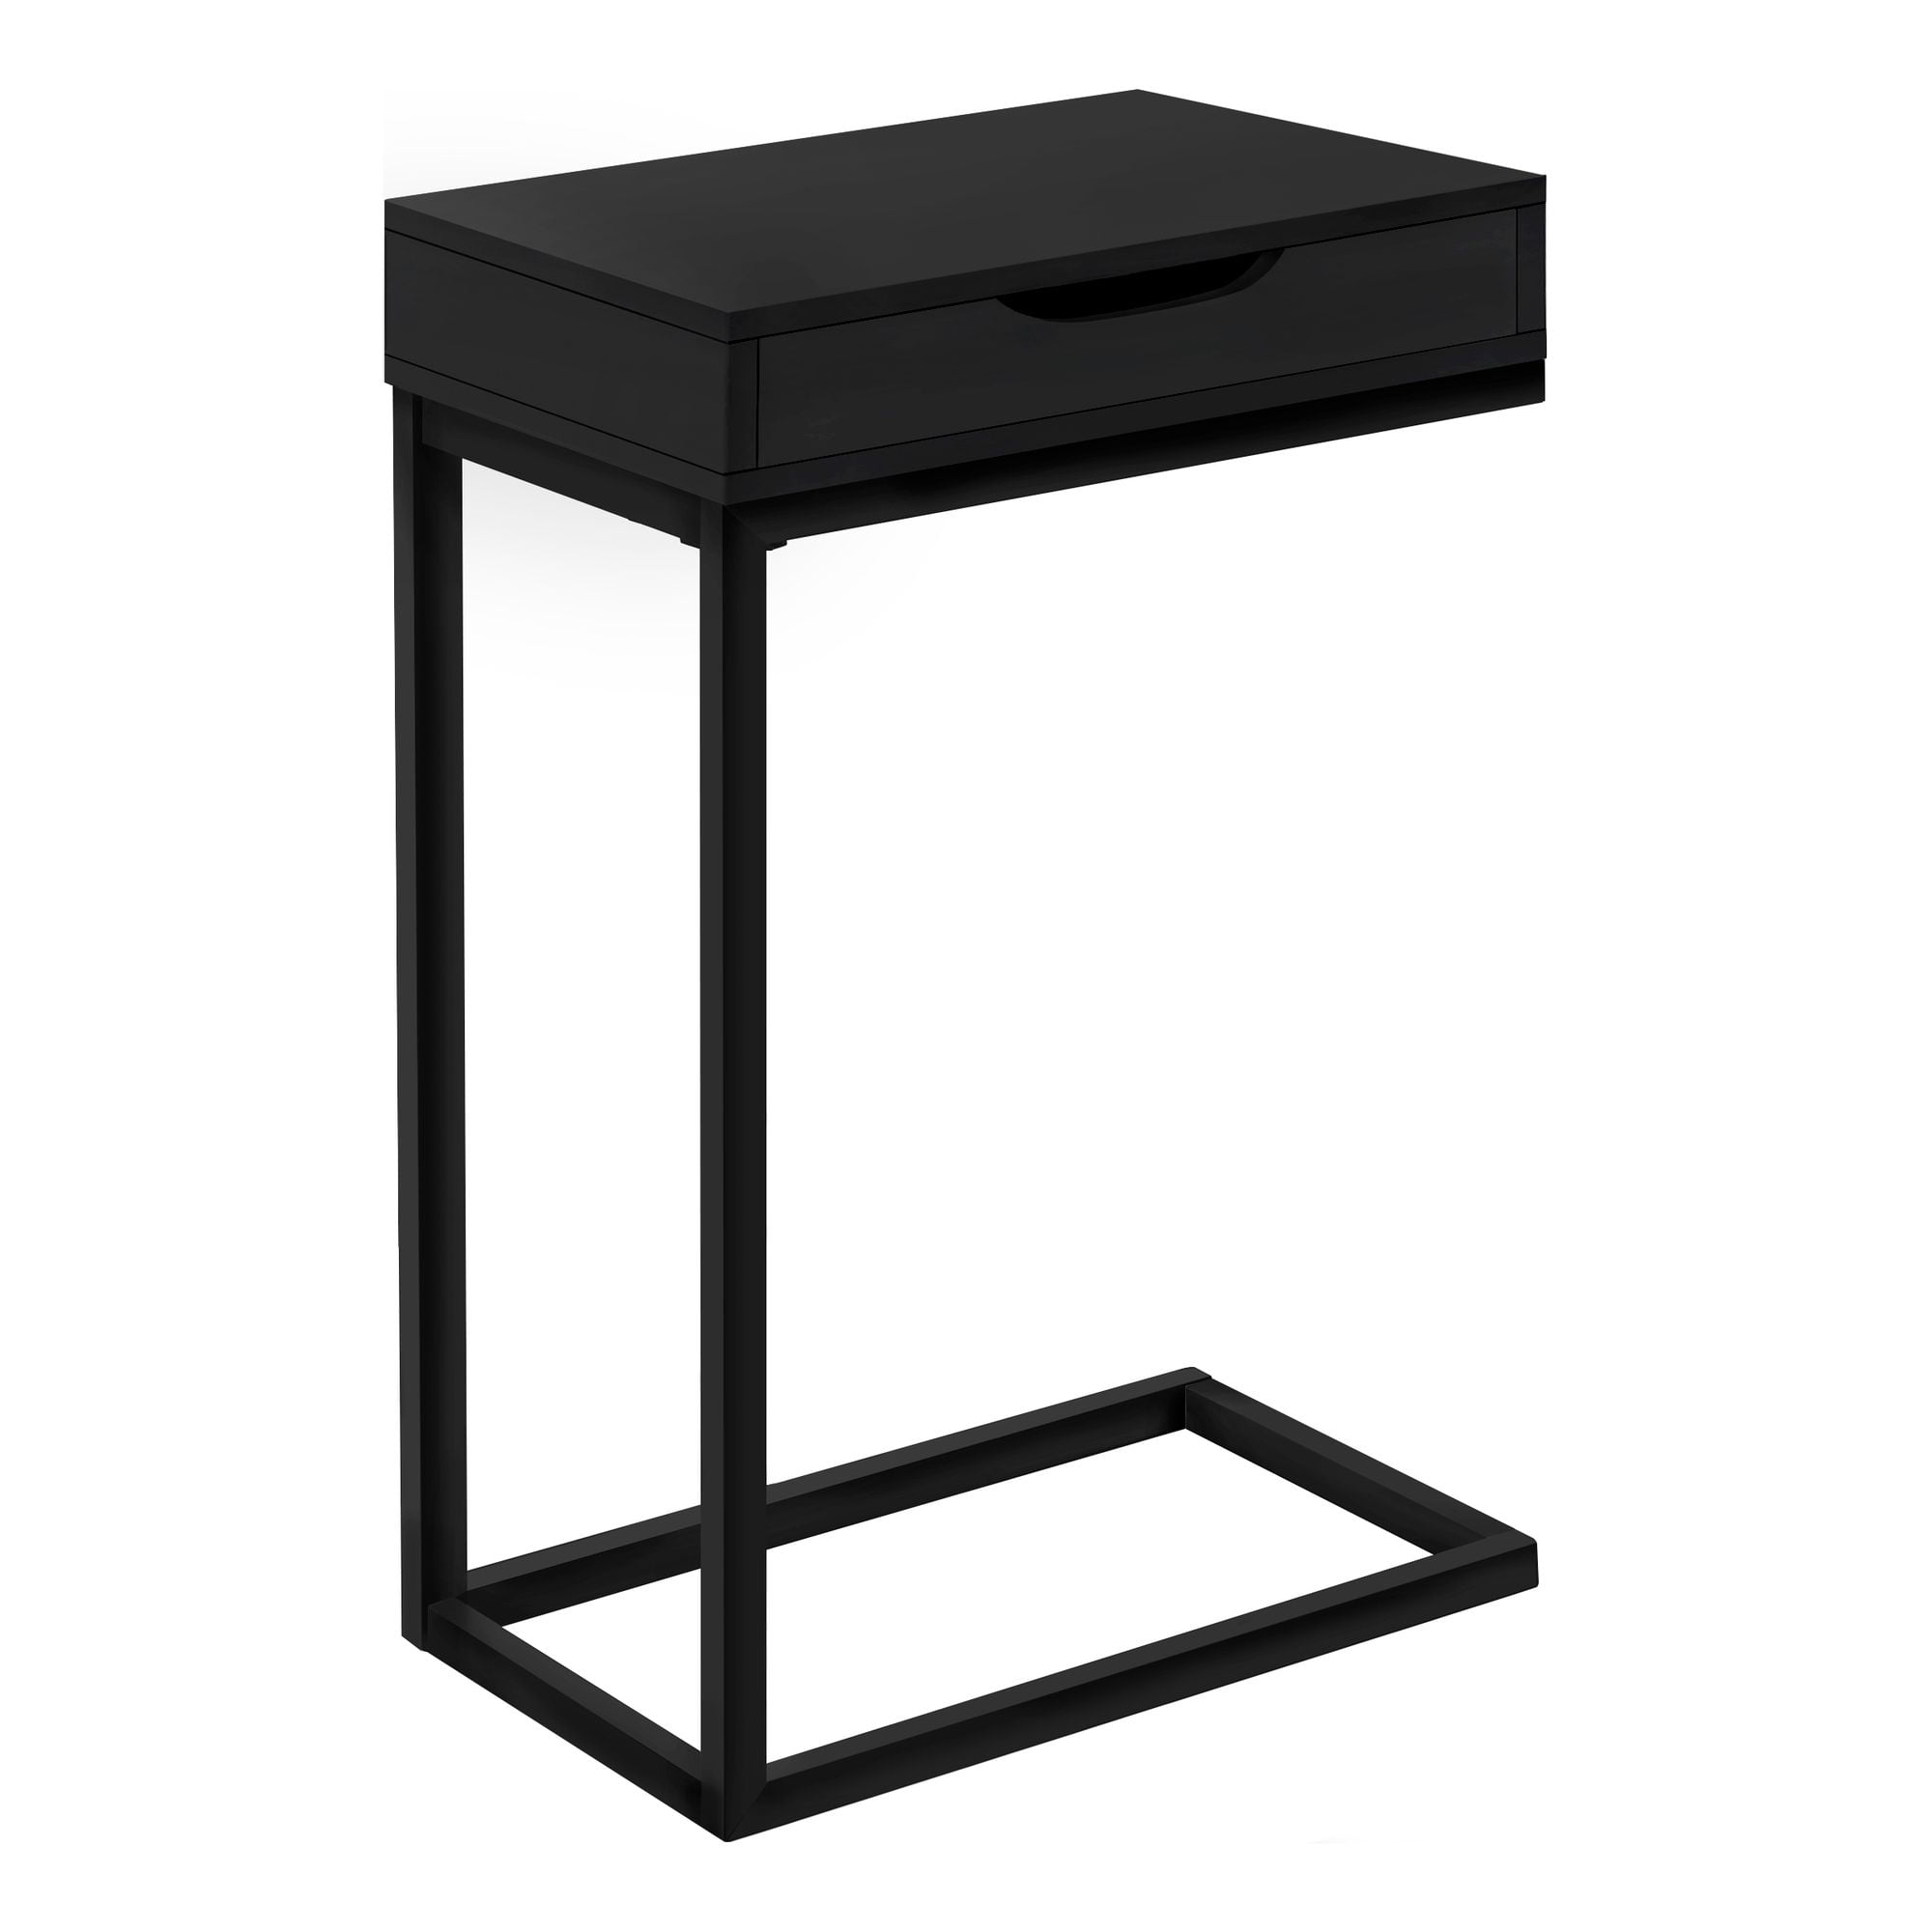 24.5" Black Contemporary C Shaped Rectangular Accent Table